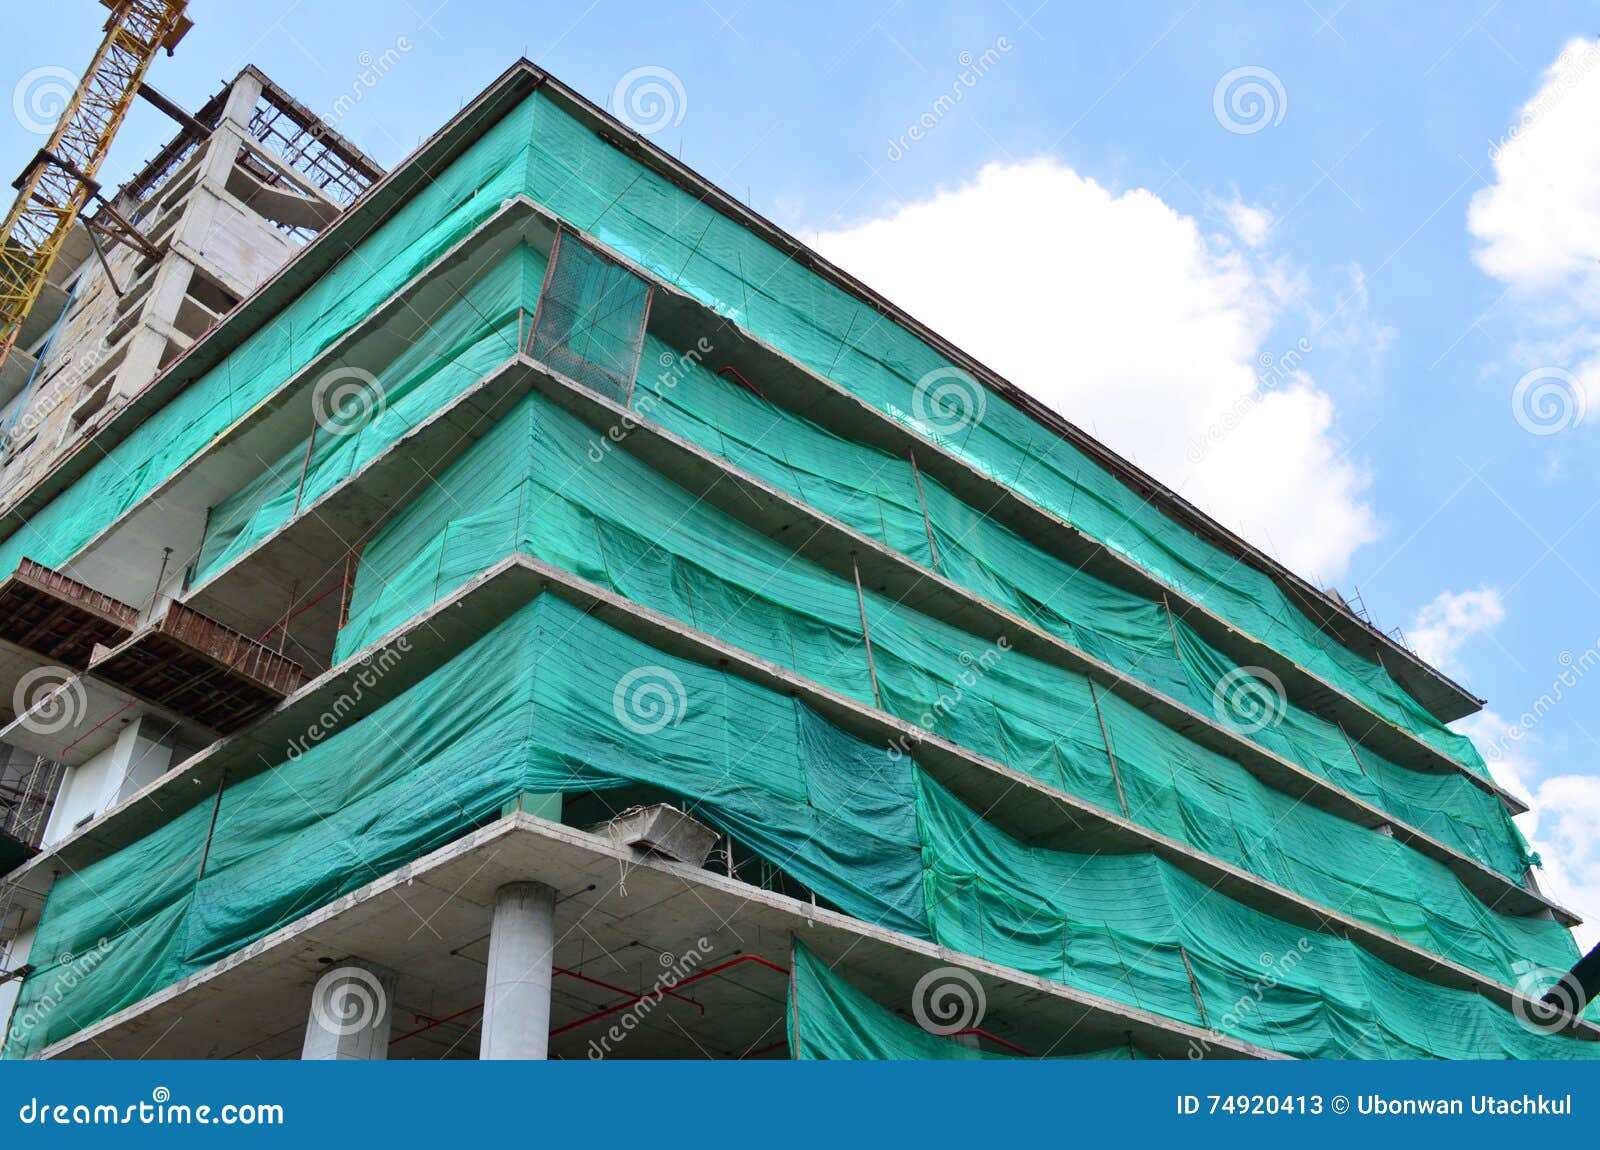 under construction building covered with green net for safety